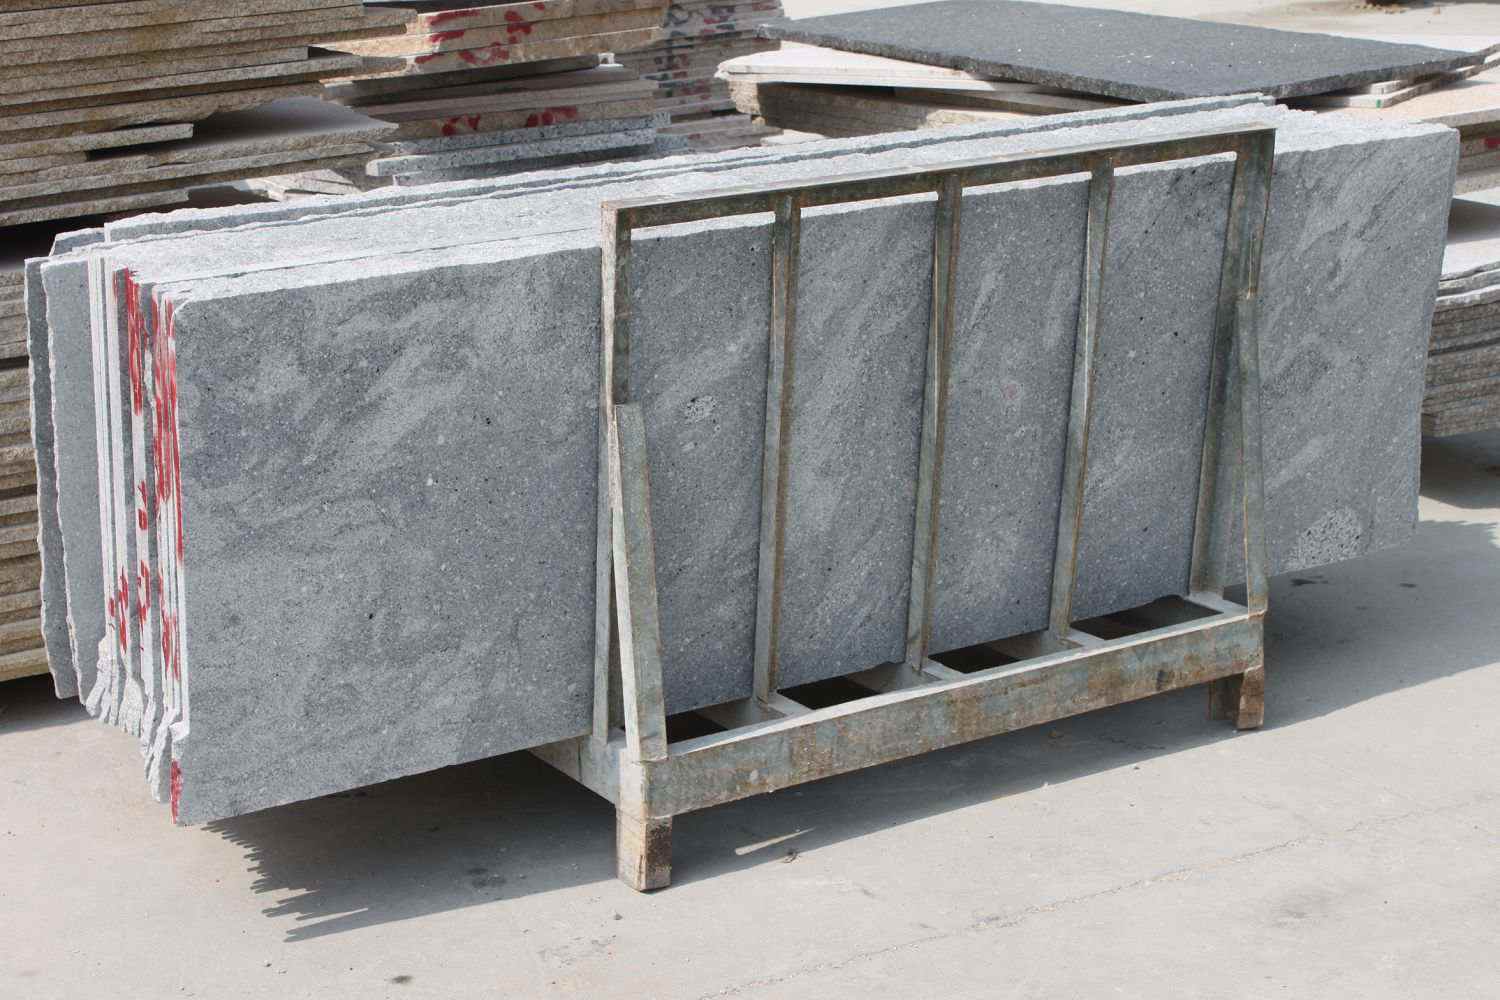 Viscount White Granite Polished Slabs Ready for Countertop Use